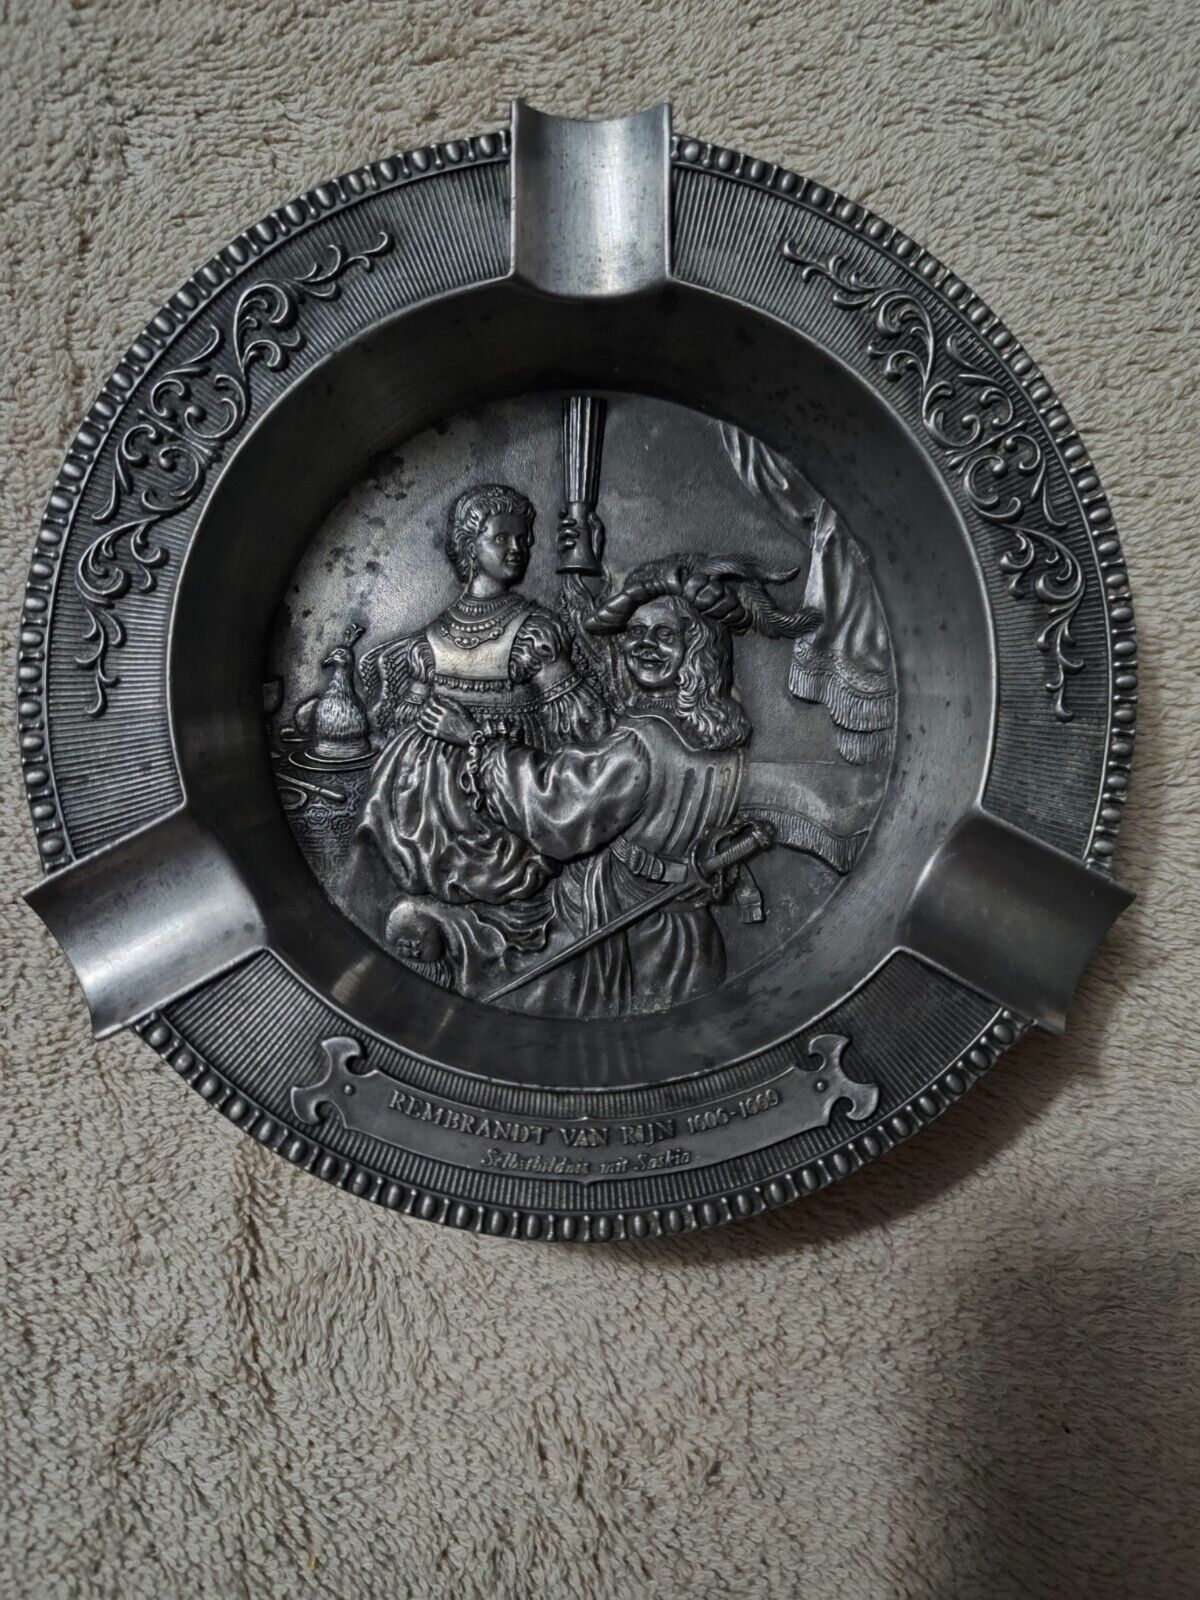 🔥 VERY RARE REMBRANDT  PEWTER ASHTRAY ENGRAVED